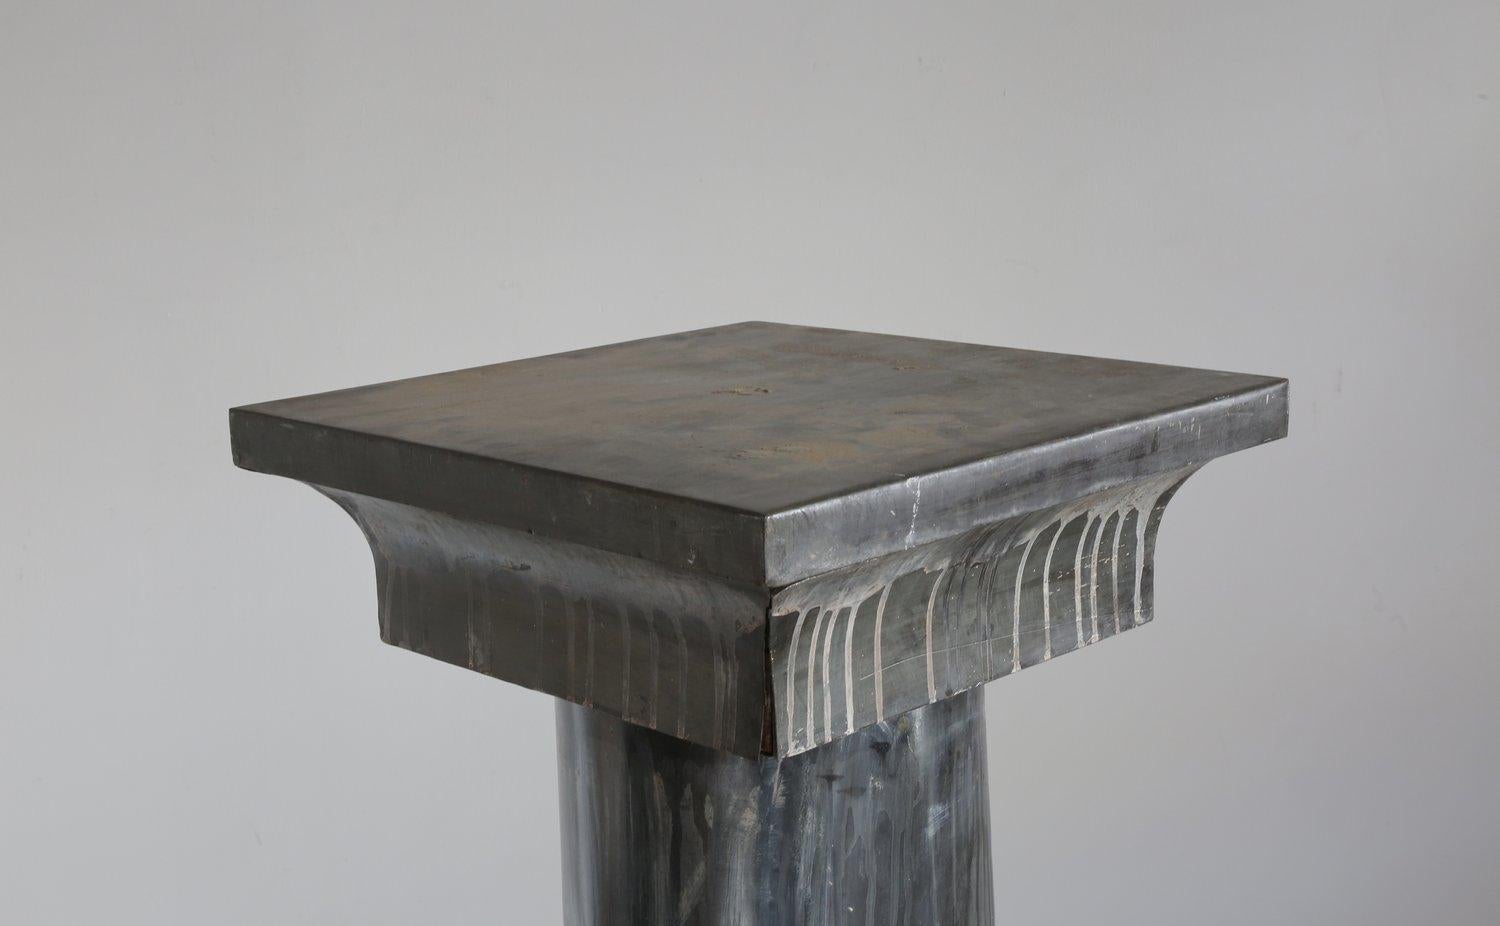 Neoclassical Zinc Plinth In Good Condition For Sale In London, England